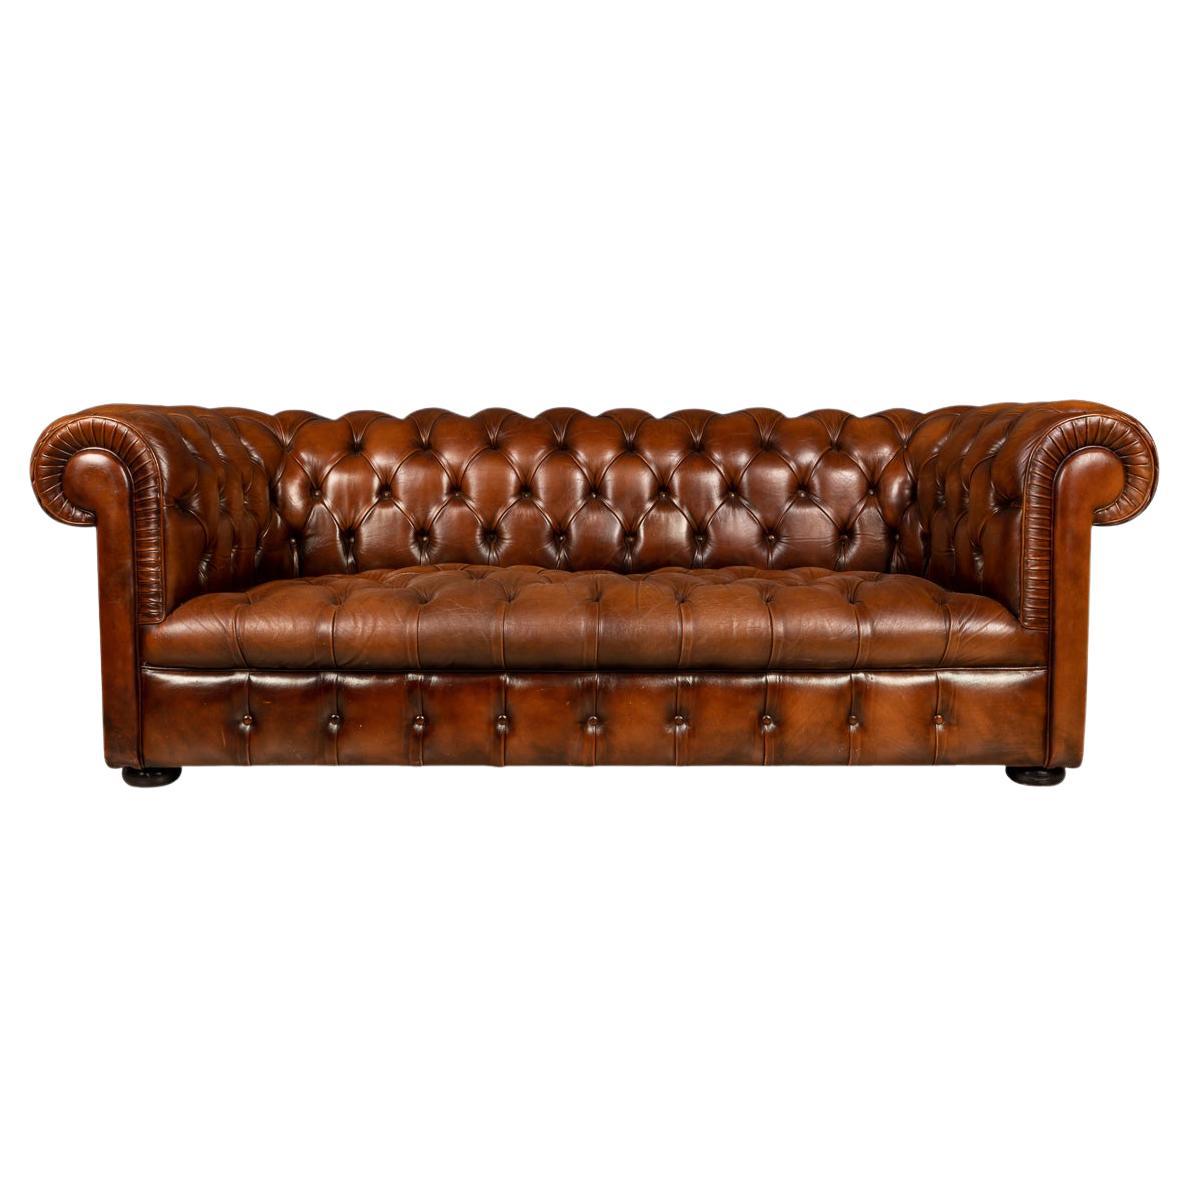 20th Century English Chesterfield Leather Sofa with Button Down Seats, c.1970